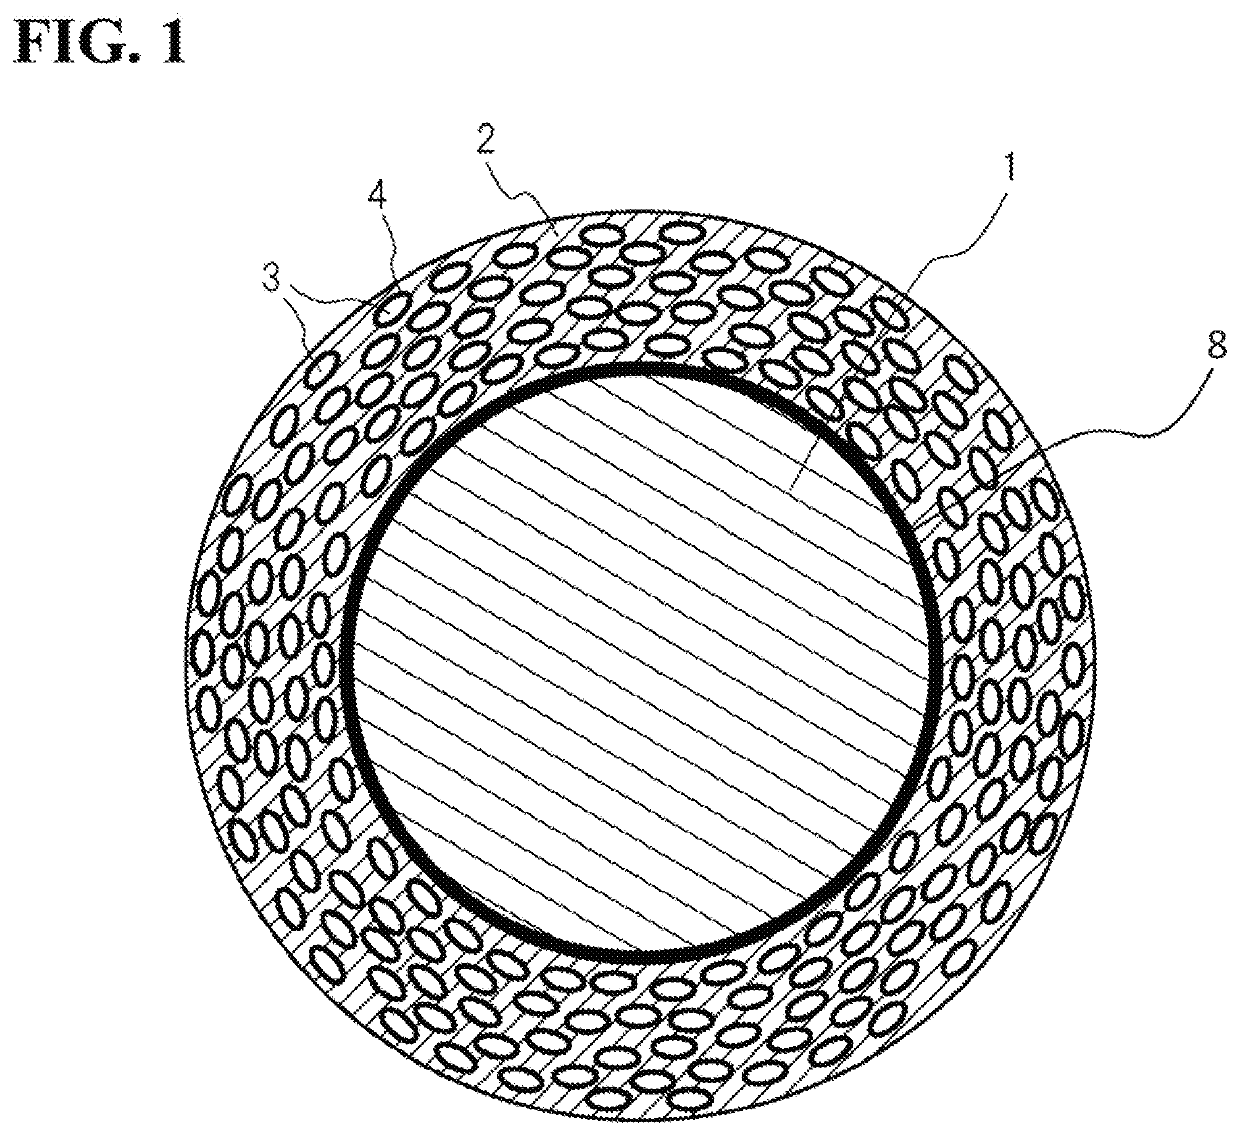 Insulated electric wire and varnish for forming insulating layer